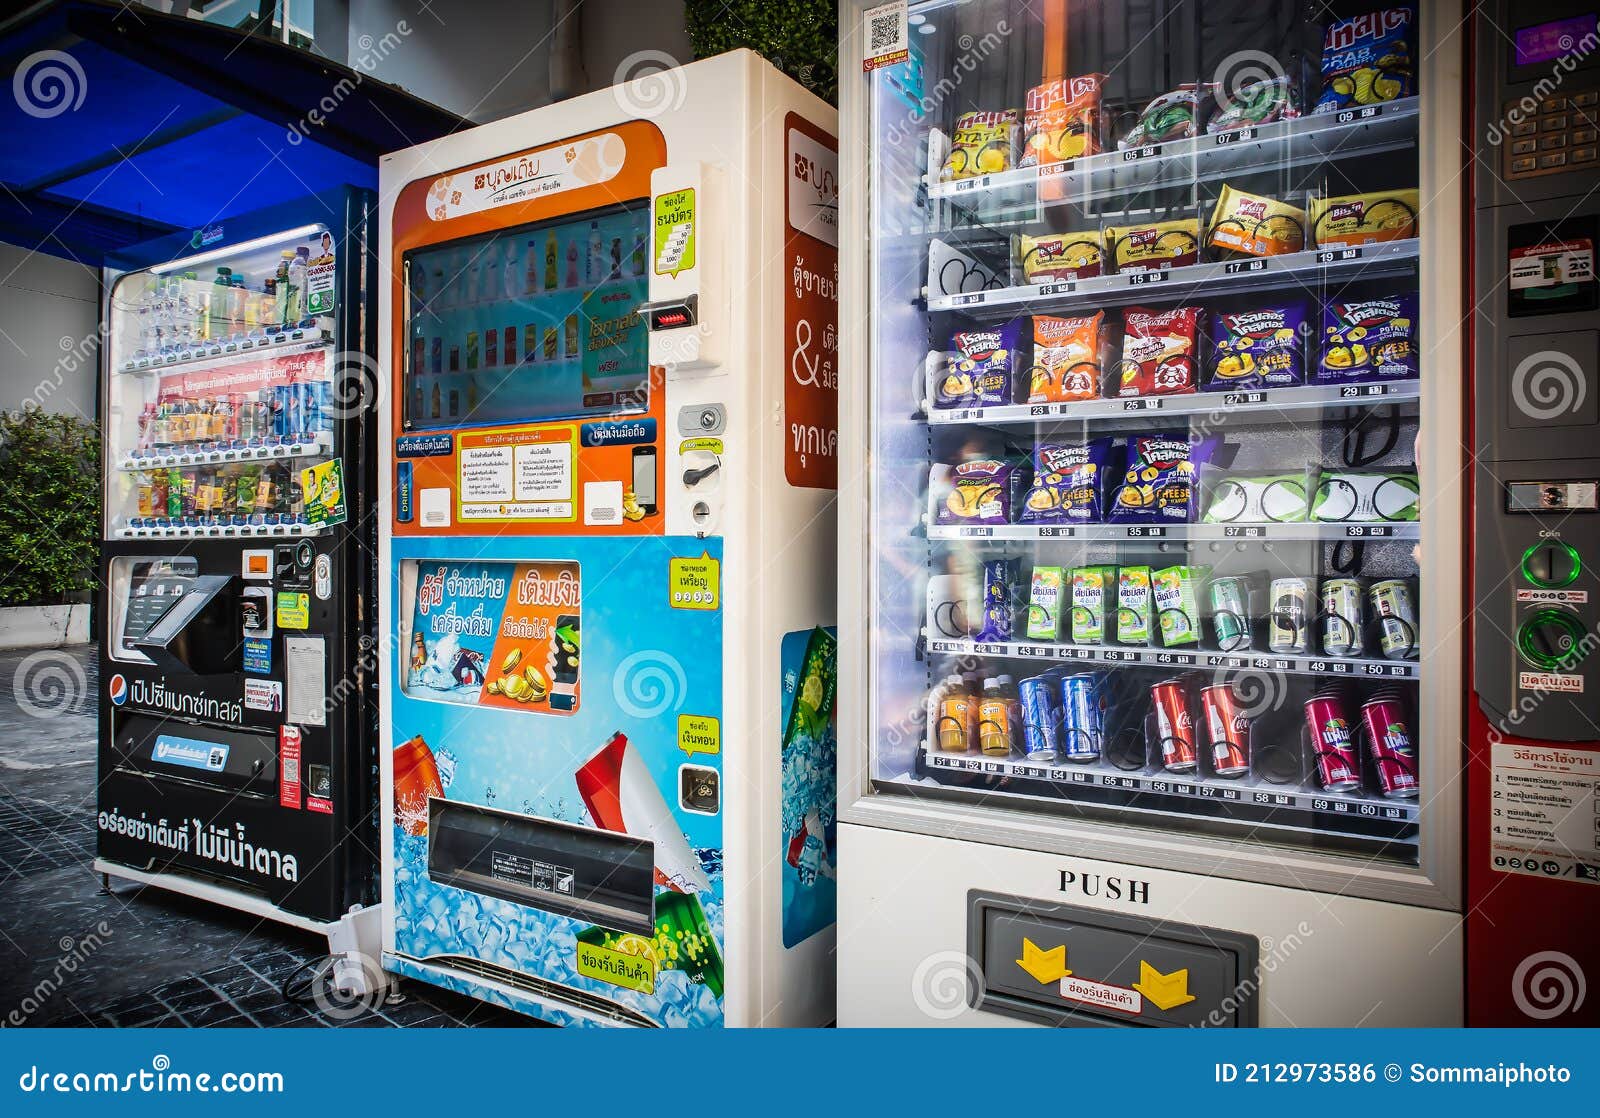 https://thumbs.dreamstime.com/z/automatic-vending-machines-to-buy-snacks-drinks-community-mall-february-automatic-vending-machines-to-buy-snacks-212973586.jpg